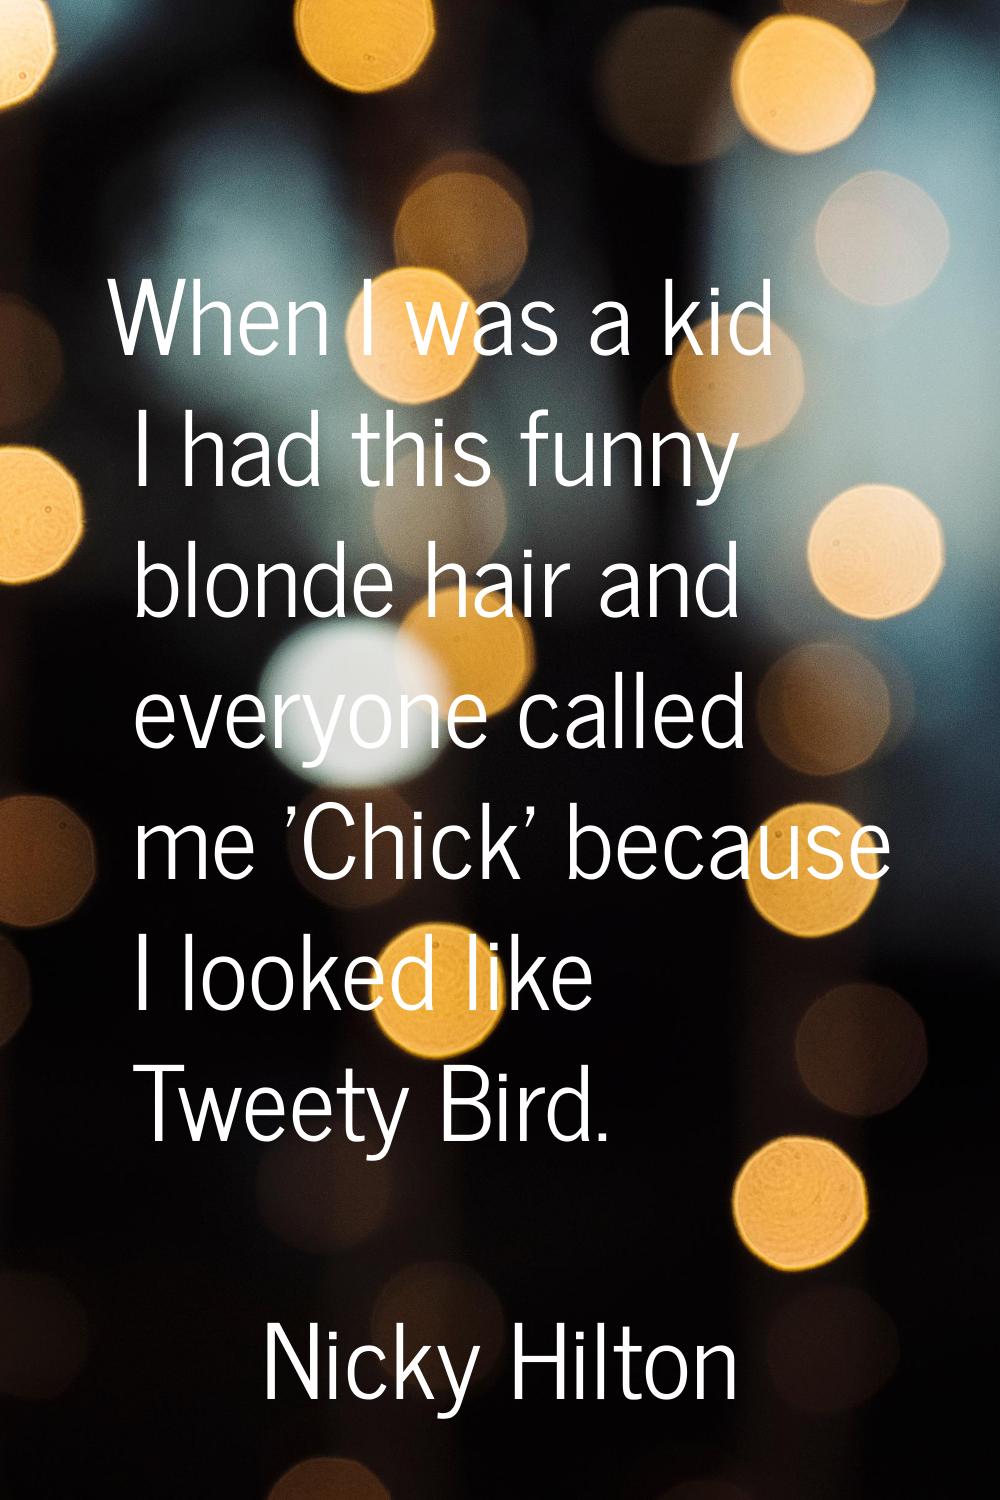 When I was a kid I had this funny blonde hair and everyone called me 'Chick' because I looked like 